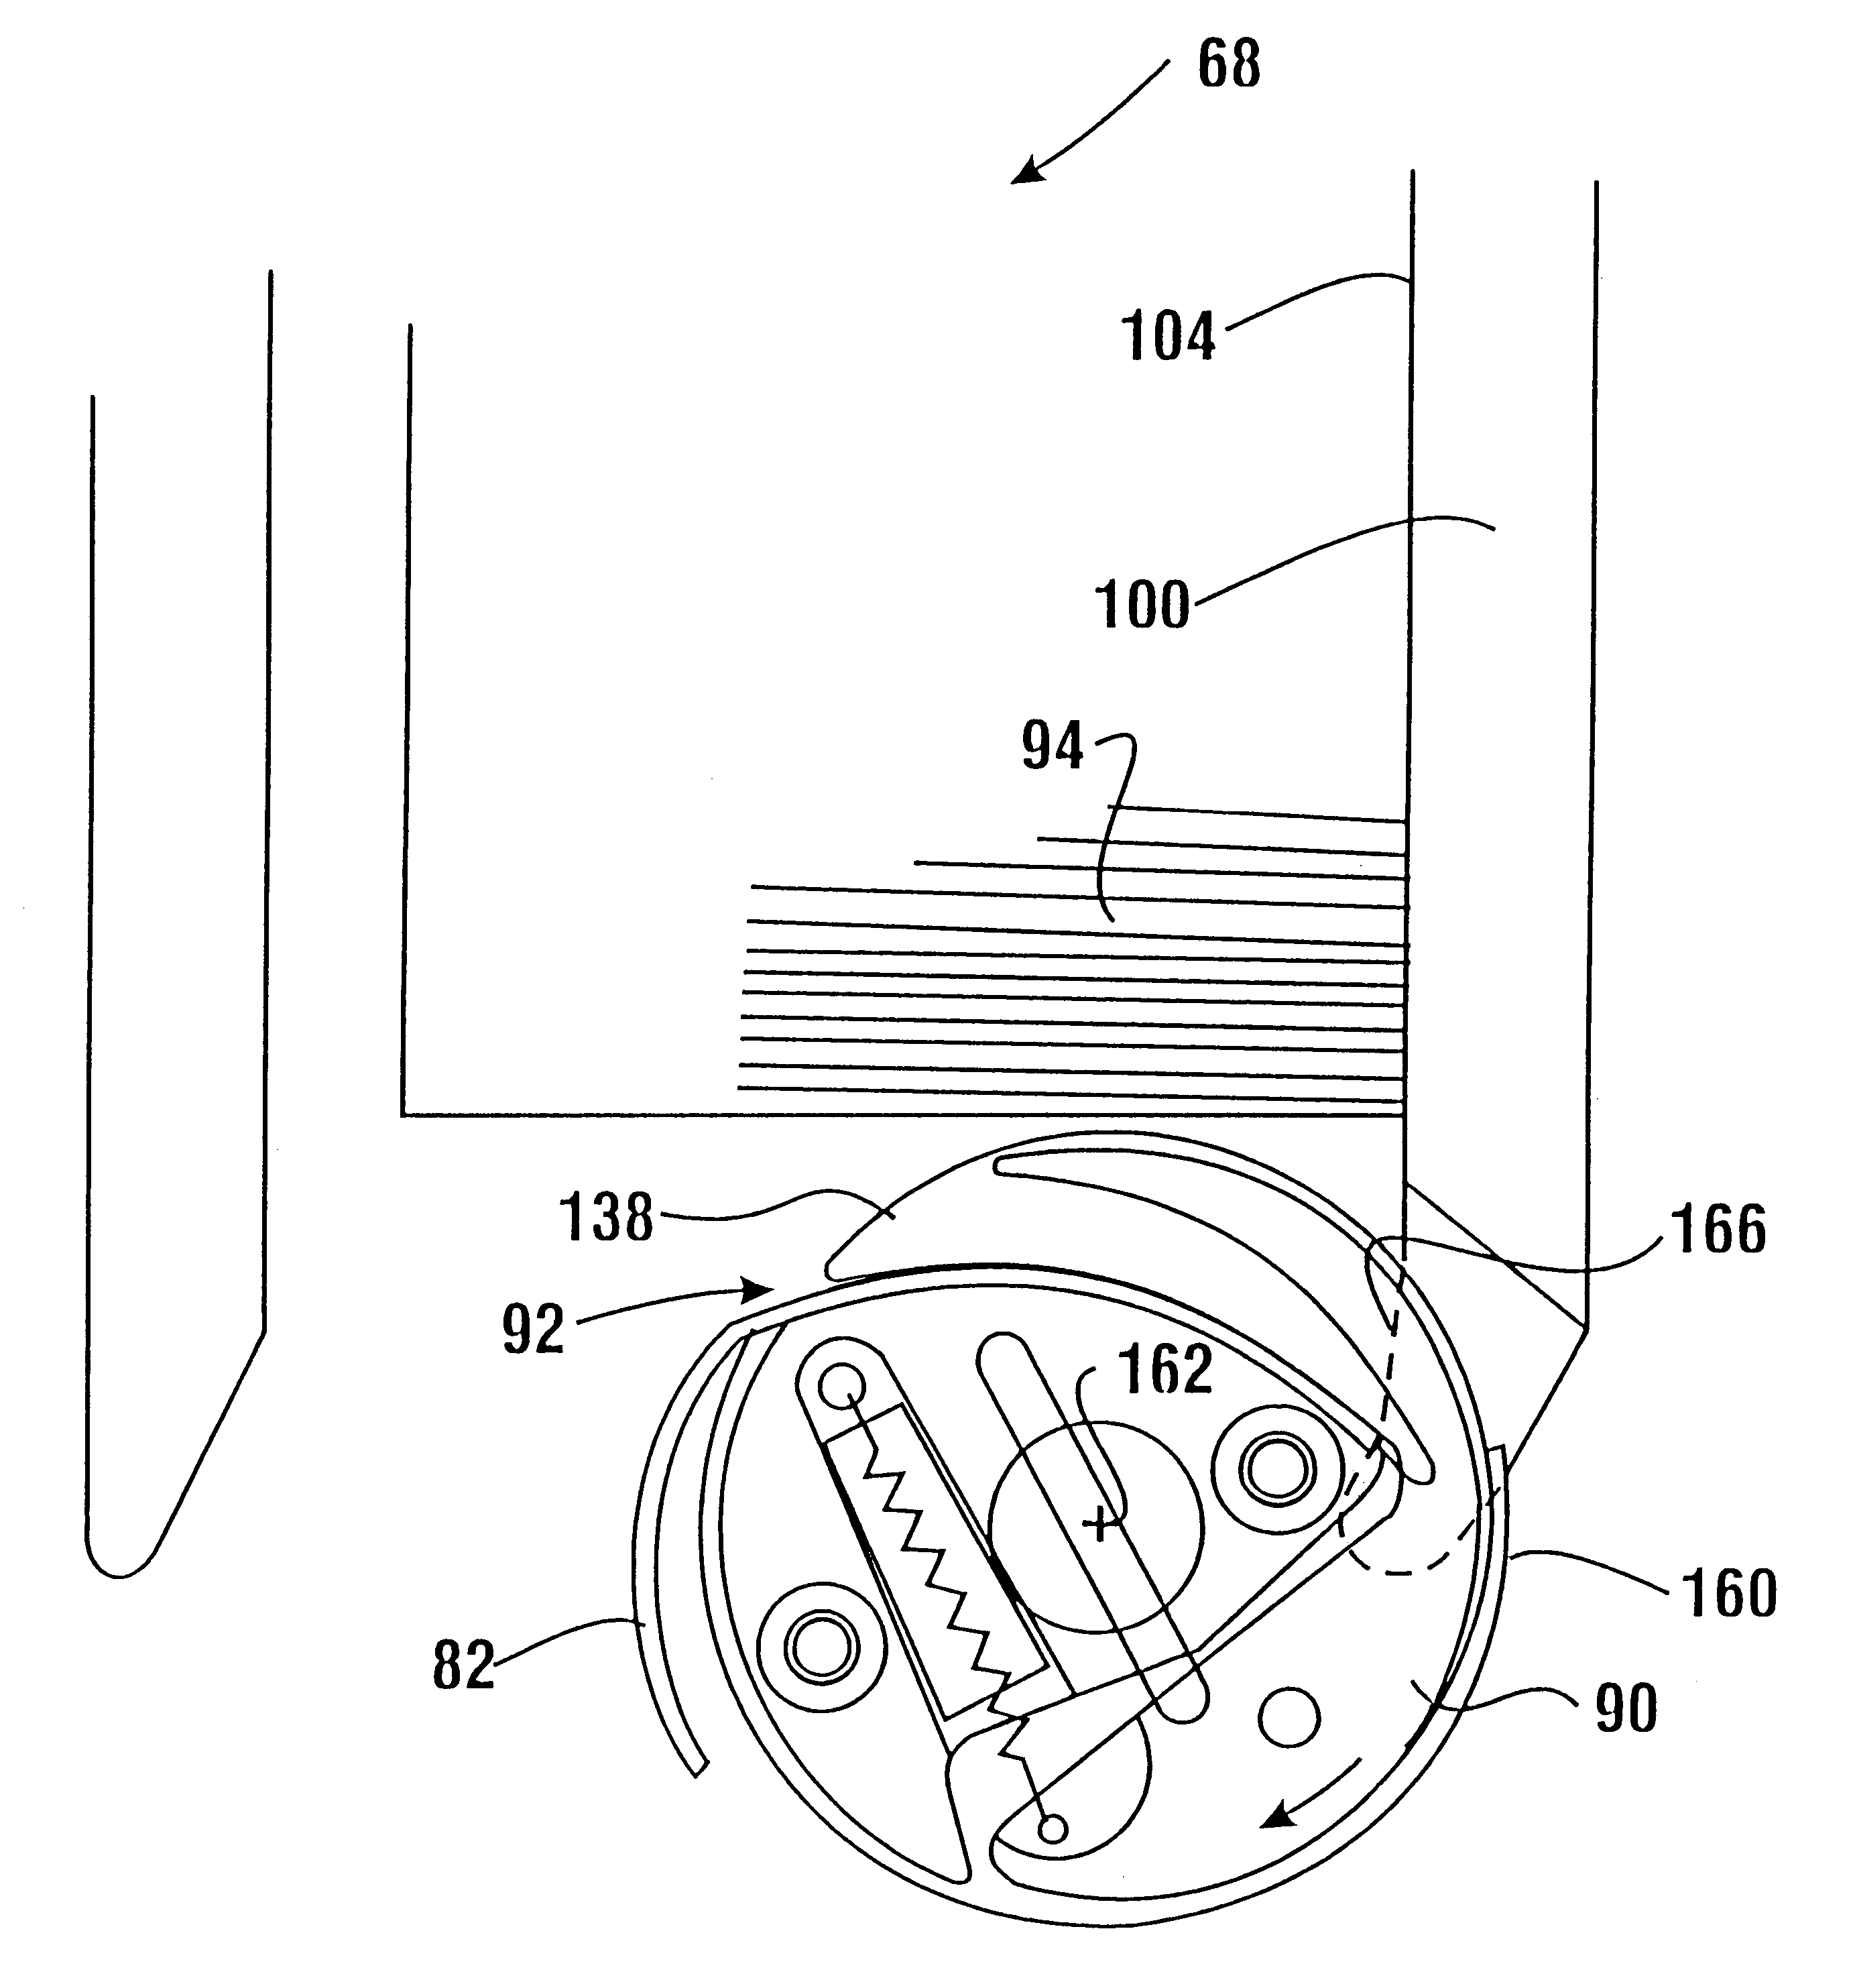 Media storage system for automated banking machine